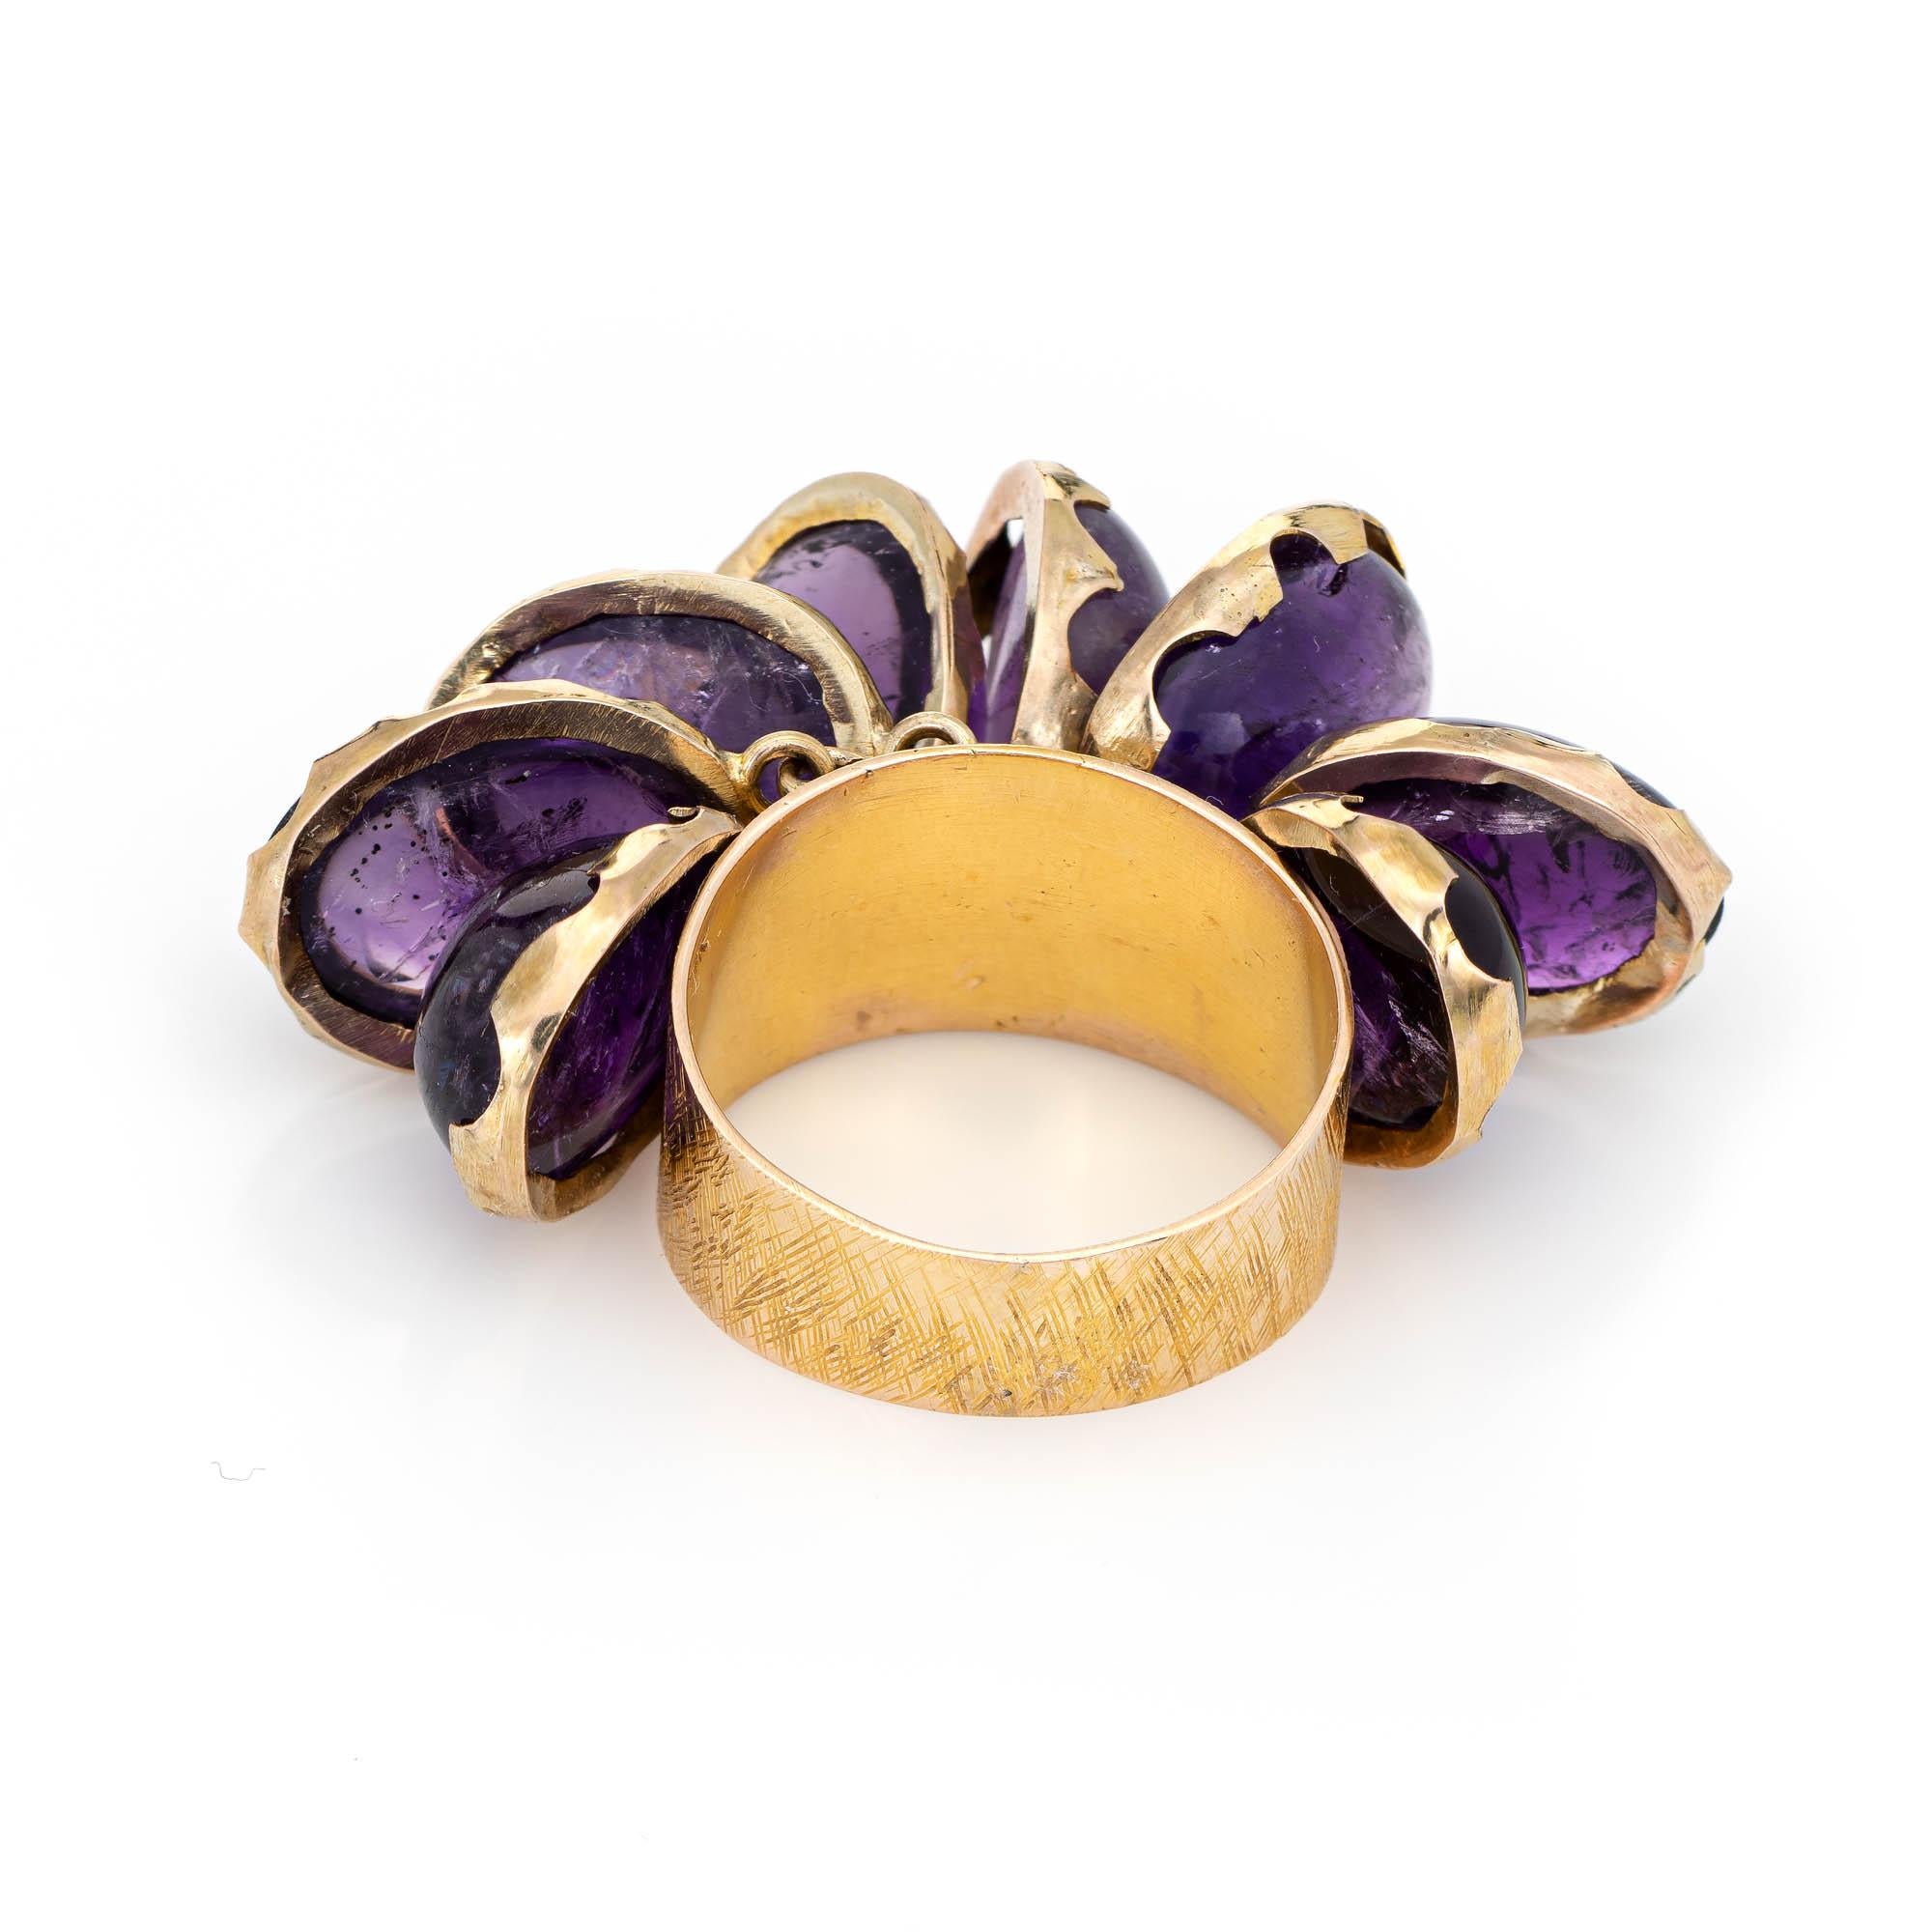 Modern Large Amethyst Charm Ring 60s Vintage 14k Yellow Gold Estate Jewelry Heirloom